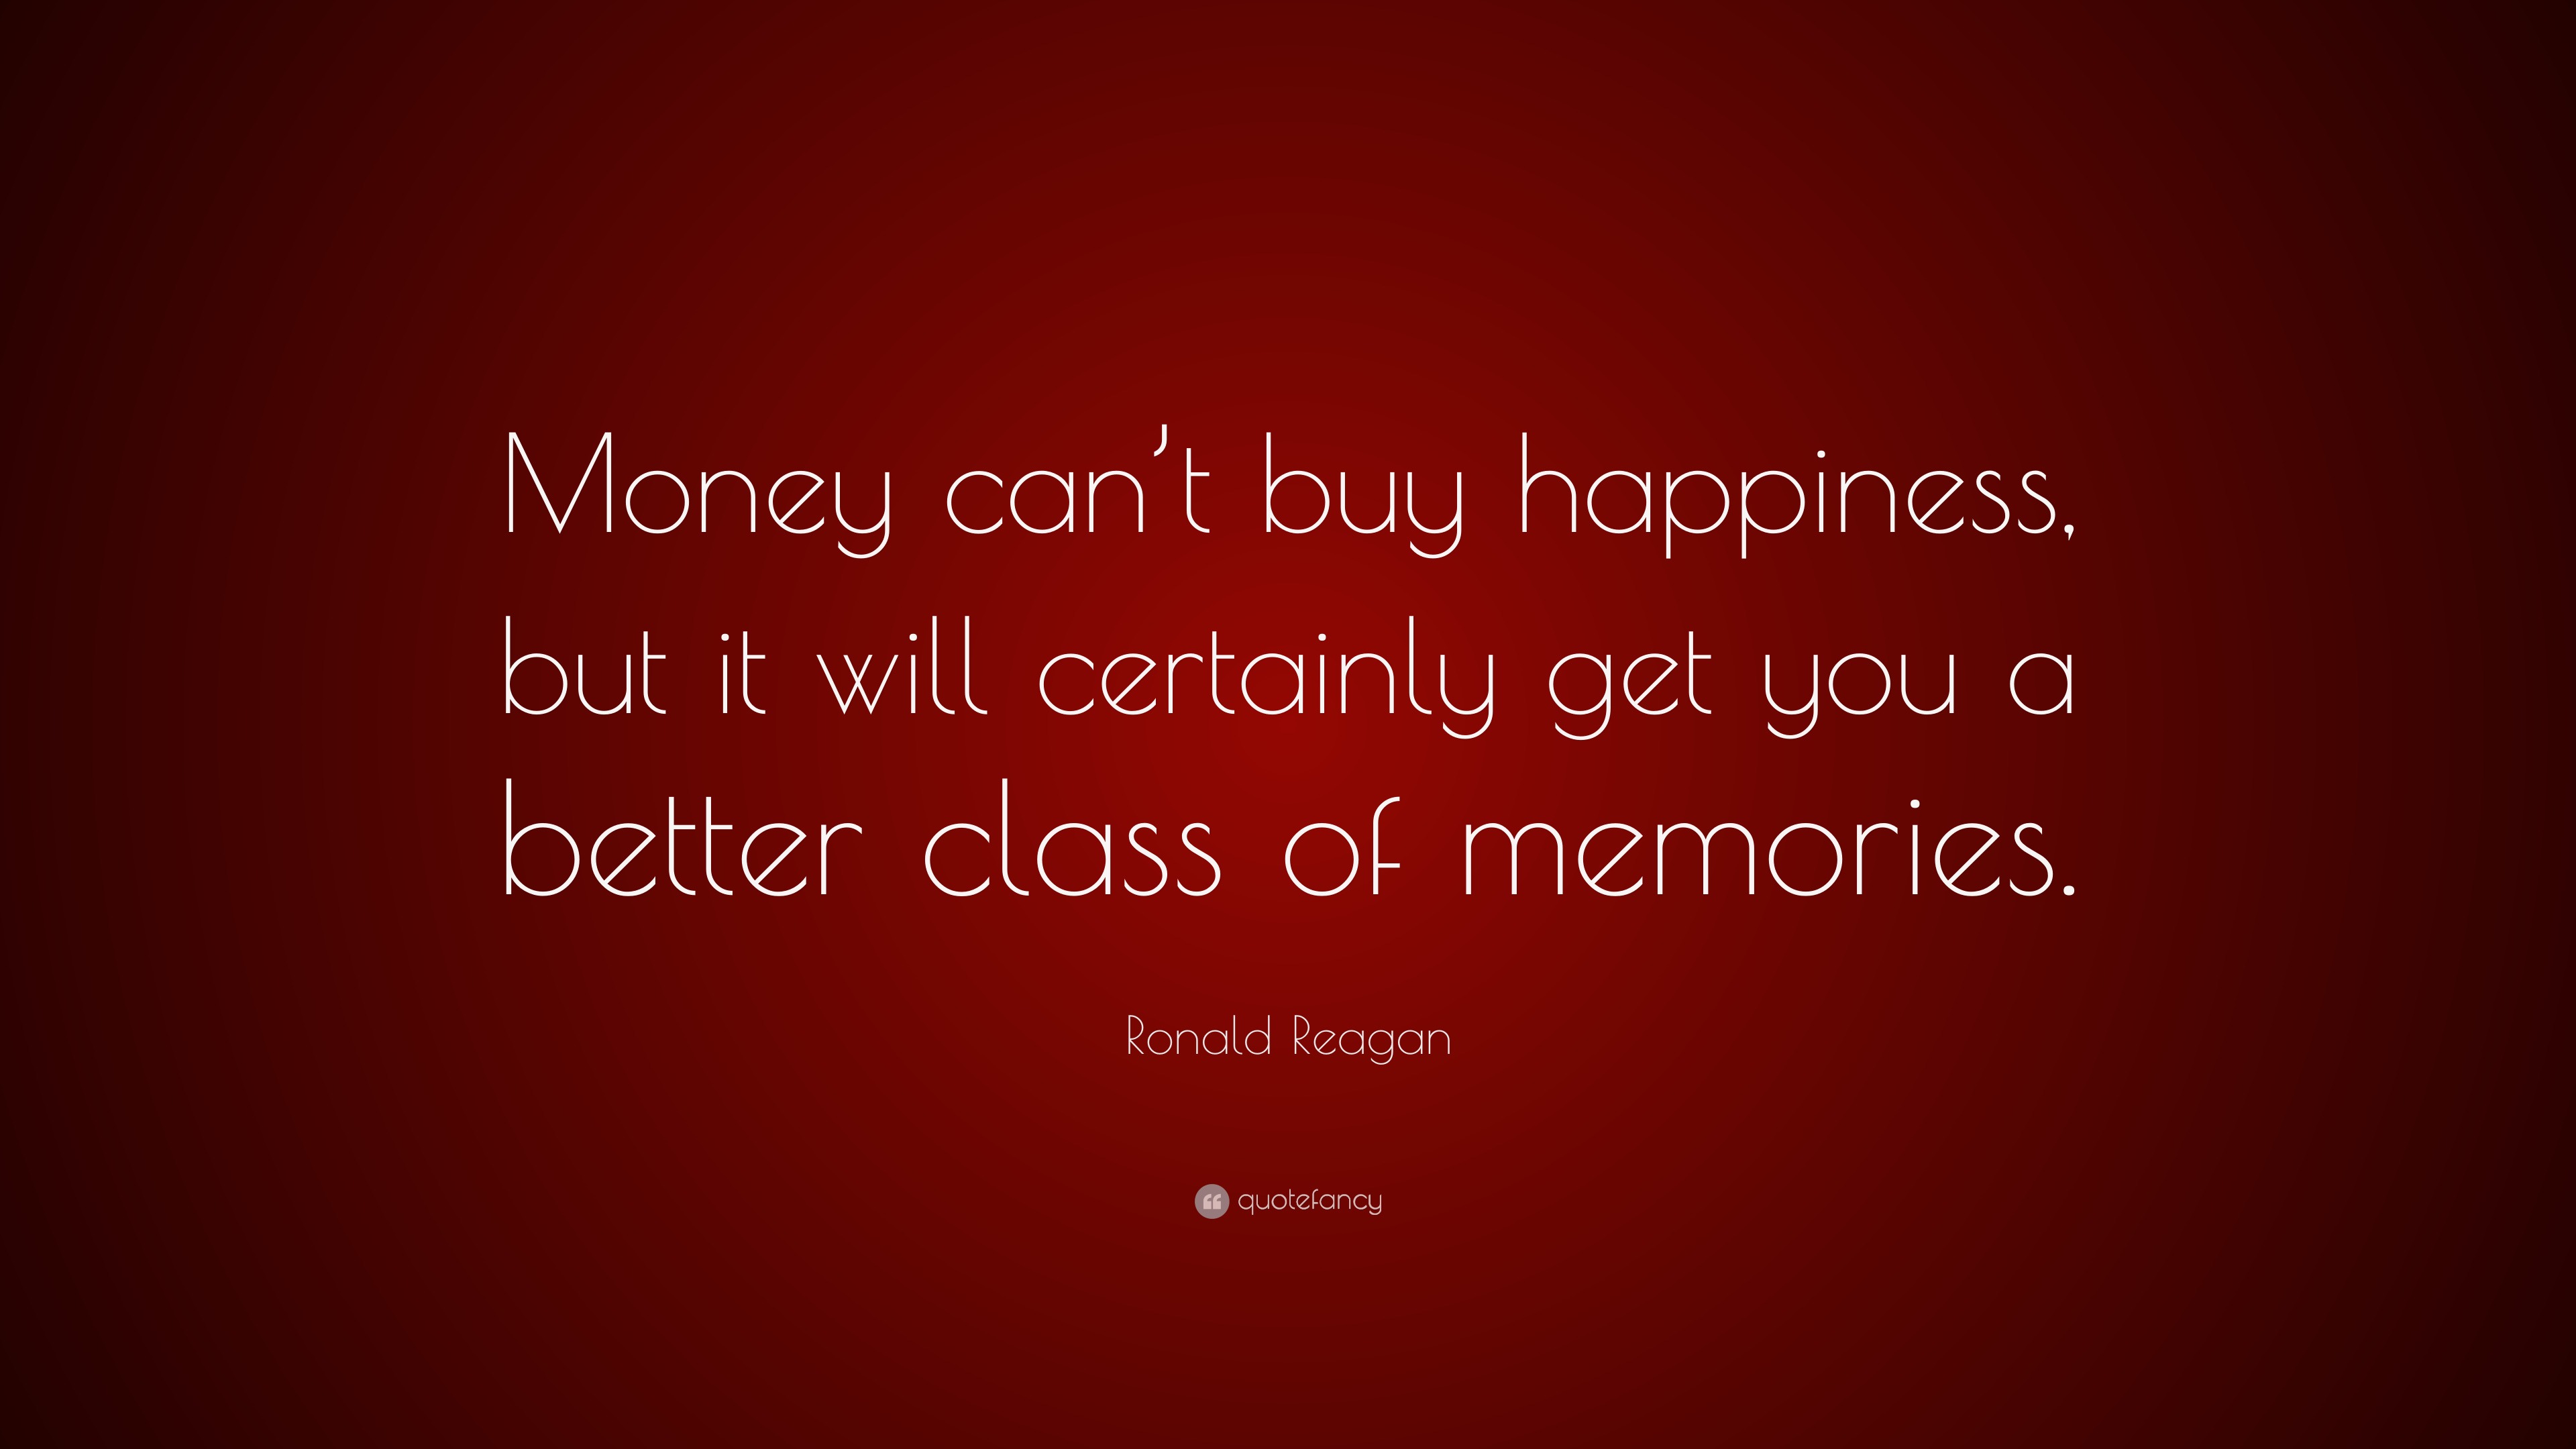 Ronald Reagan Quote: “Money can’t buy happiness, but it will certainly